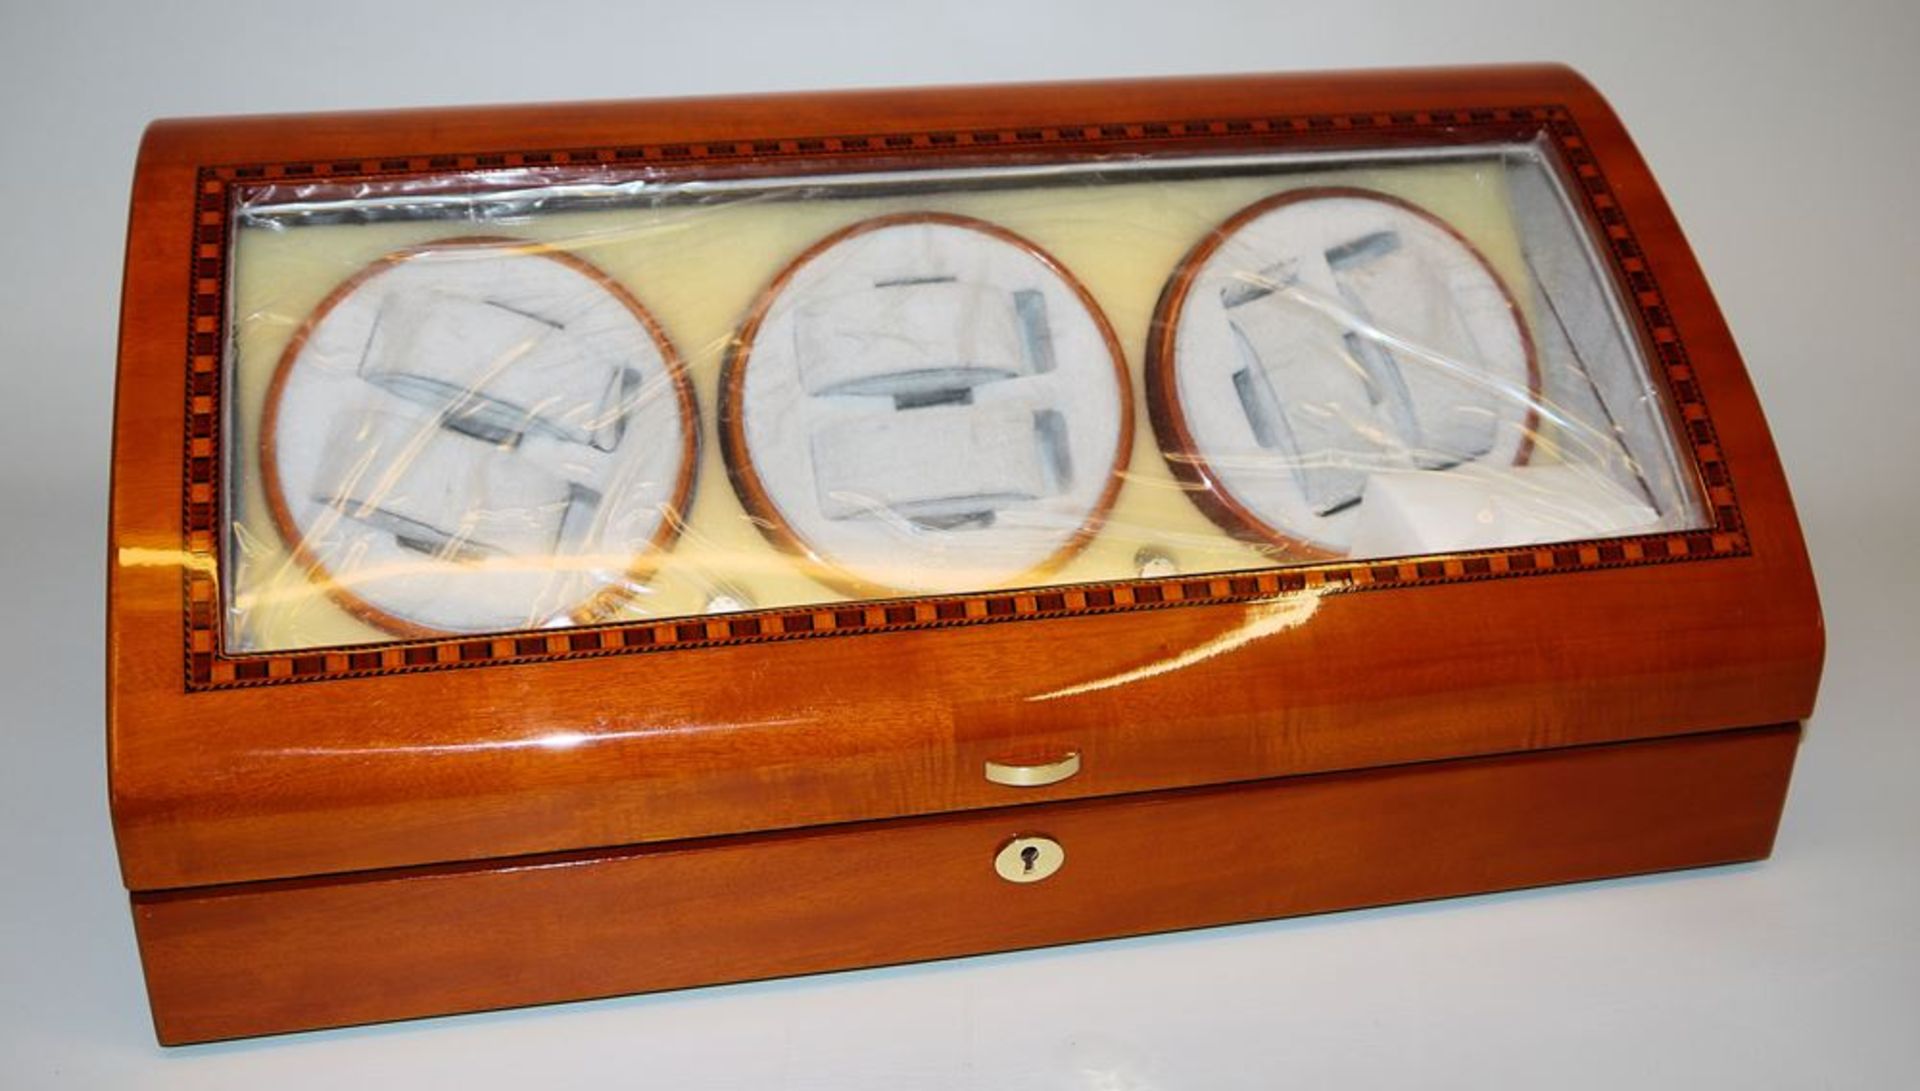 Rothenschild watch winder for 6 automatic watches, as new - Image 2 of 2